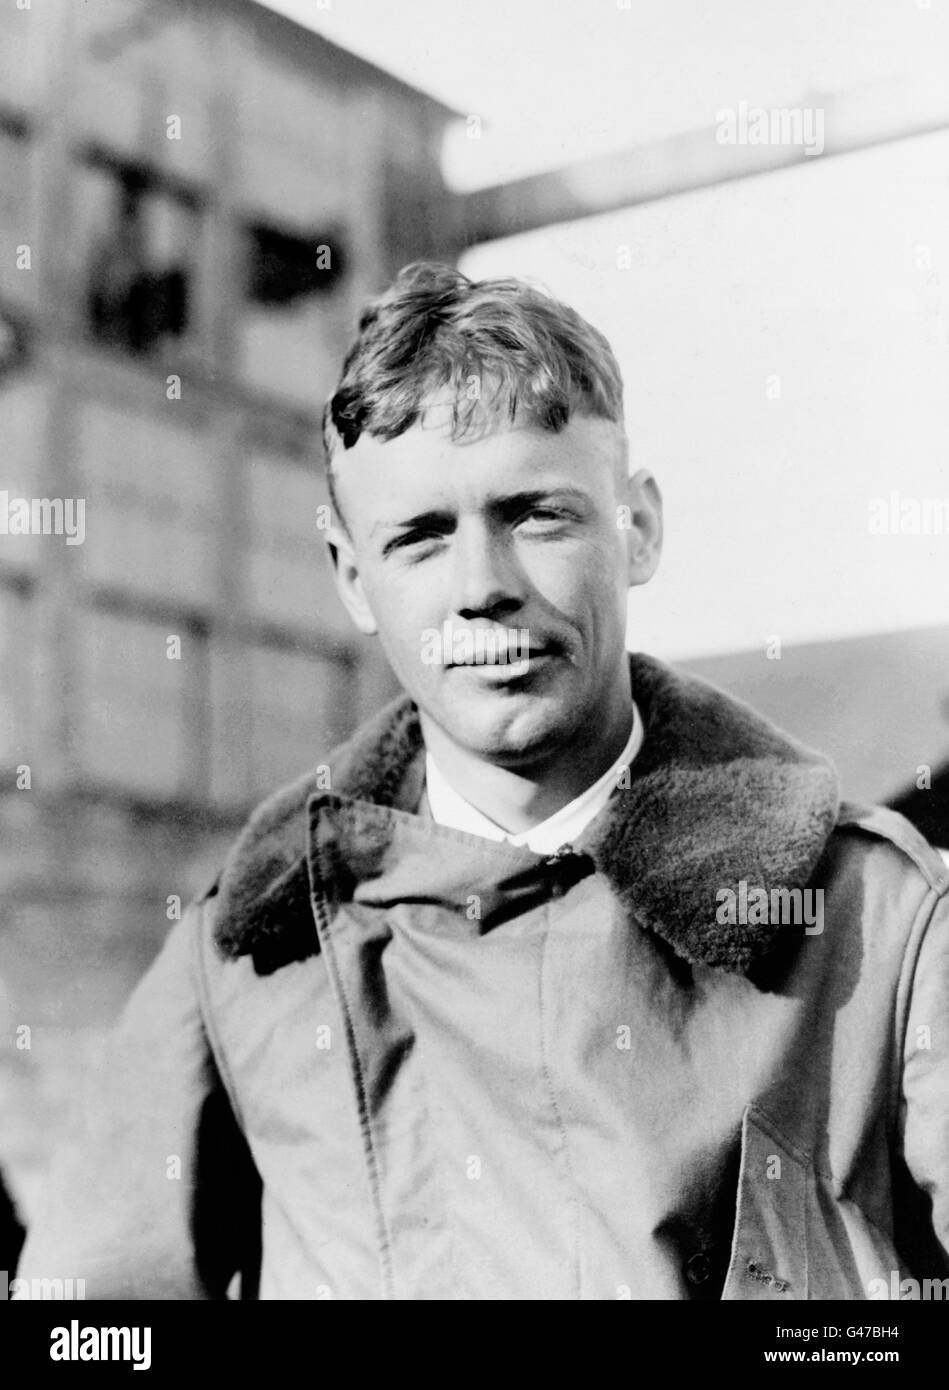 Charles Lindbergh (1902-1974), the American aviator famous for his first non-stop solo flight across the Atlantic in 1927. Photo by Underwood & Underwood, 1927. Stock Photo